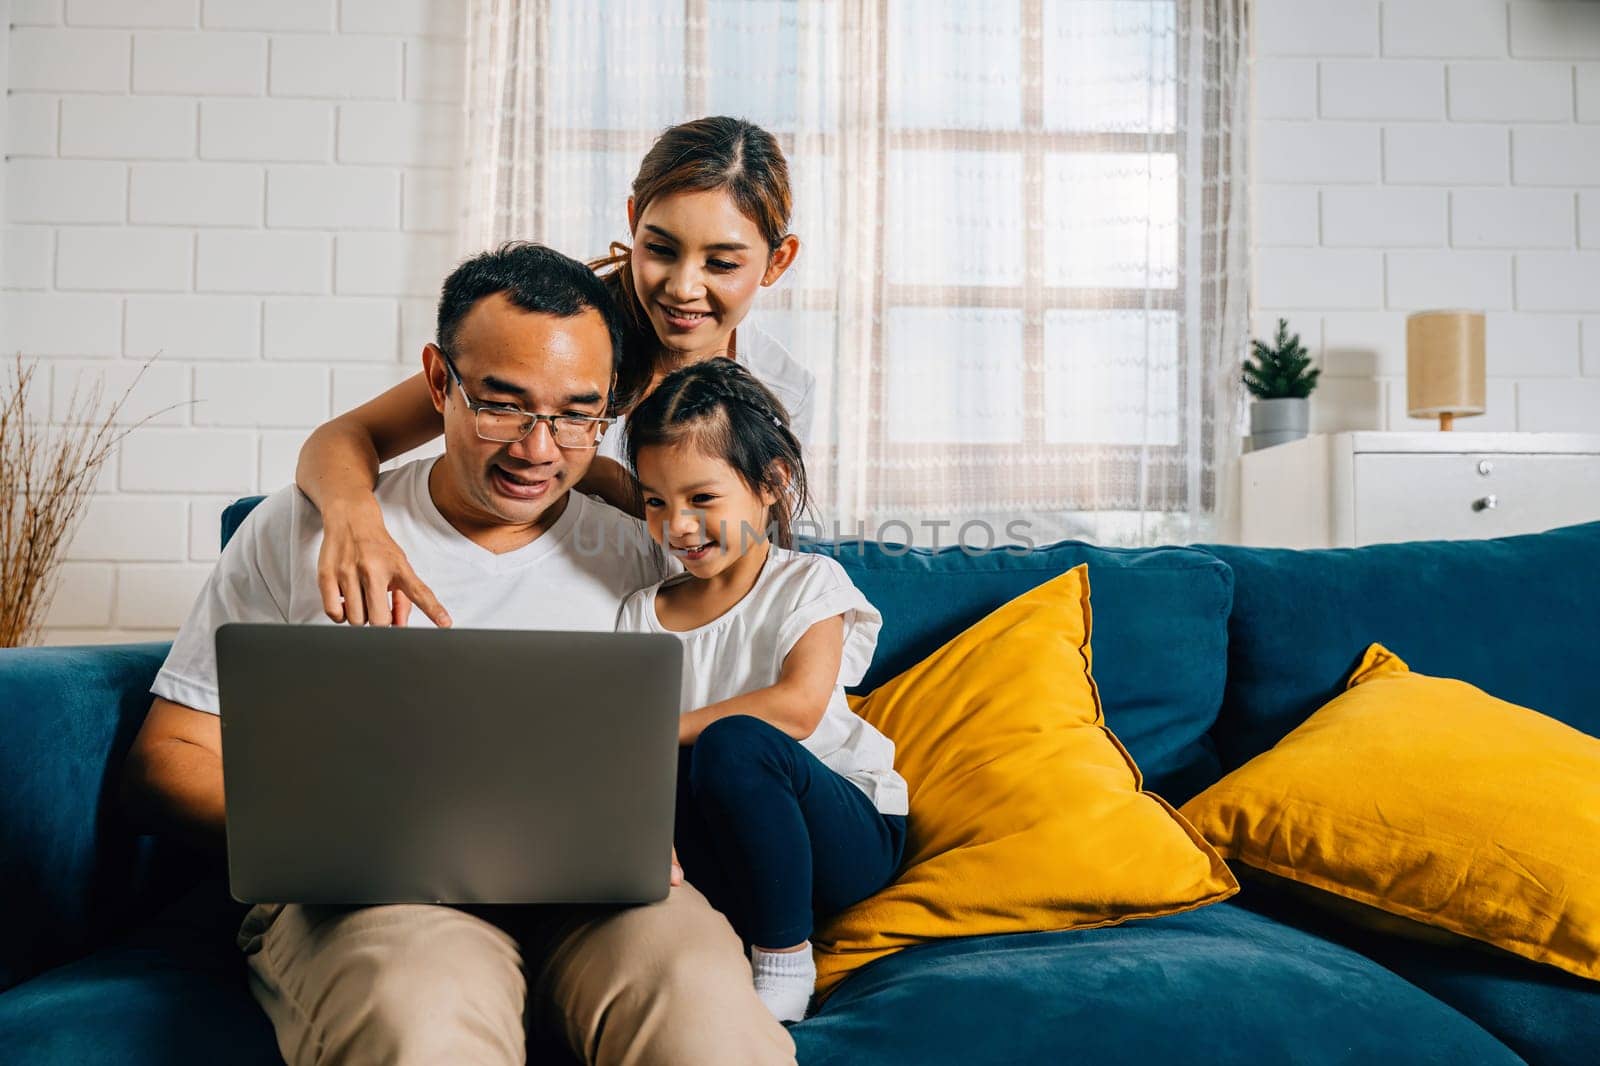 Family time on the couch as parents and kids engage with a laptop. A young man woman son and daughter search bond and smile in their modern home creating moments of happiness.